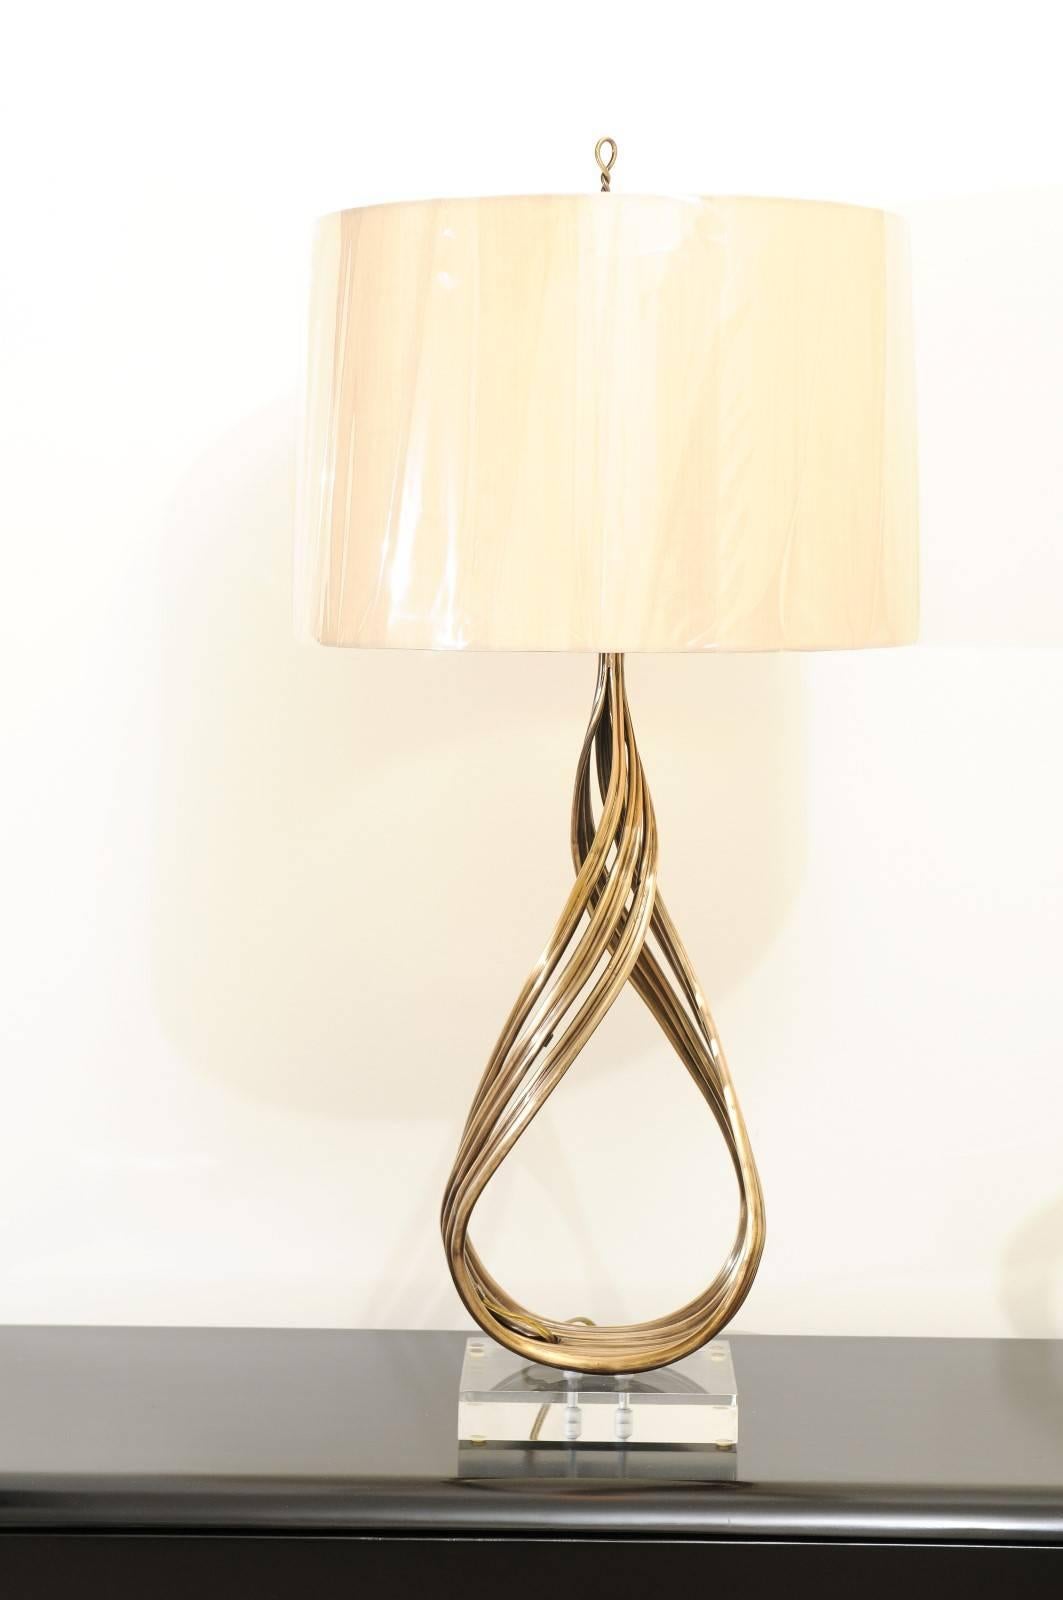 A fabulous restored pair of large-scale lamps from a difficult to find series produced by Chapman, circa 1993. The stunning twisted solid brass form evokes a flame, mounted atop a chunky Lucite plinth. One of the most coveted designs in the Chapman